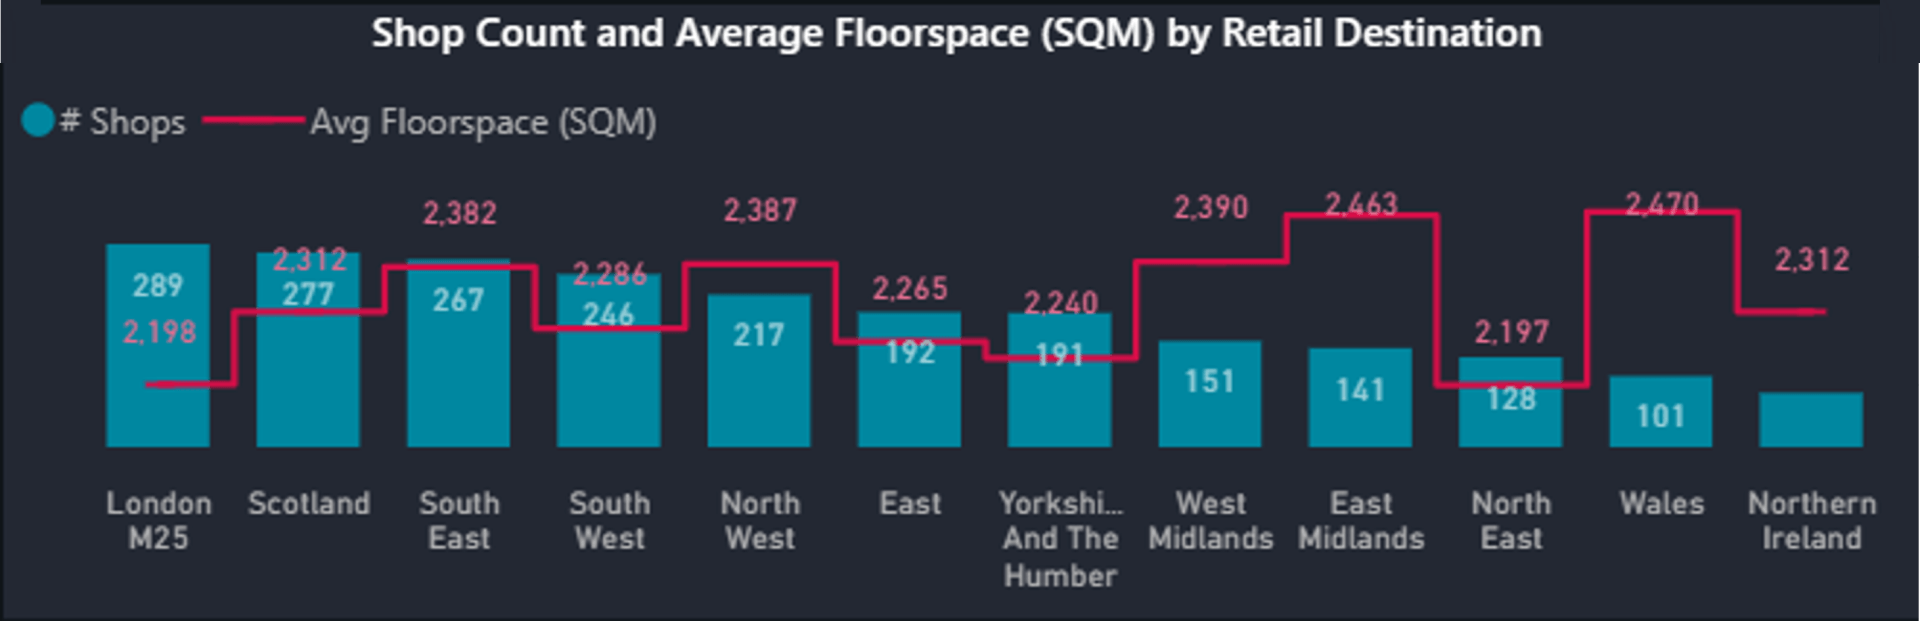 Store Counts and Average Floorspace by different retail destinations in the UK